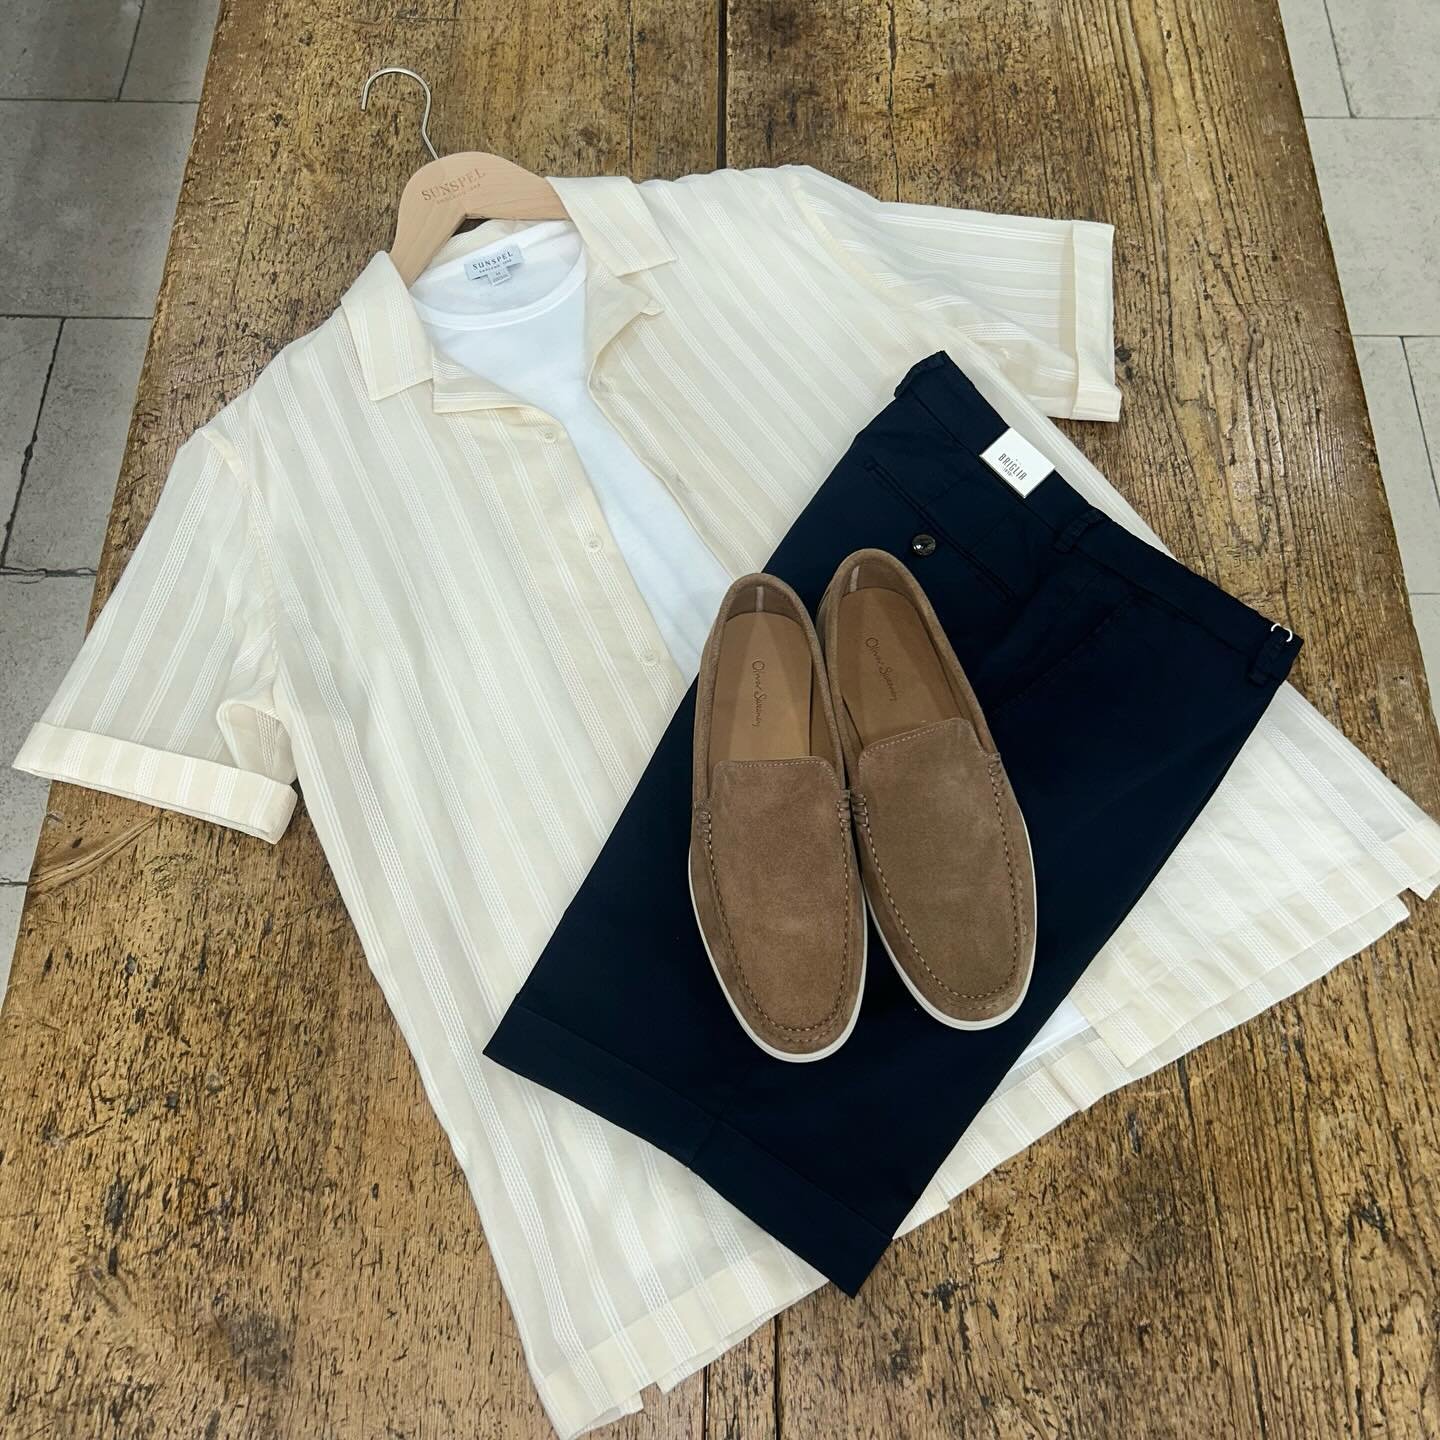 With the weather finally brightening up and the weekend fast approaching Jack has put together your summer garden party outfit. Starting Sunspel up top with a relaxed camp collar shirt over a classic Sunspel tee, paired with a slim fit, made in Italy